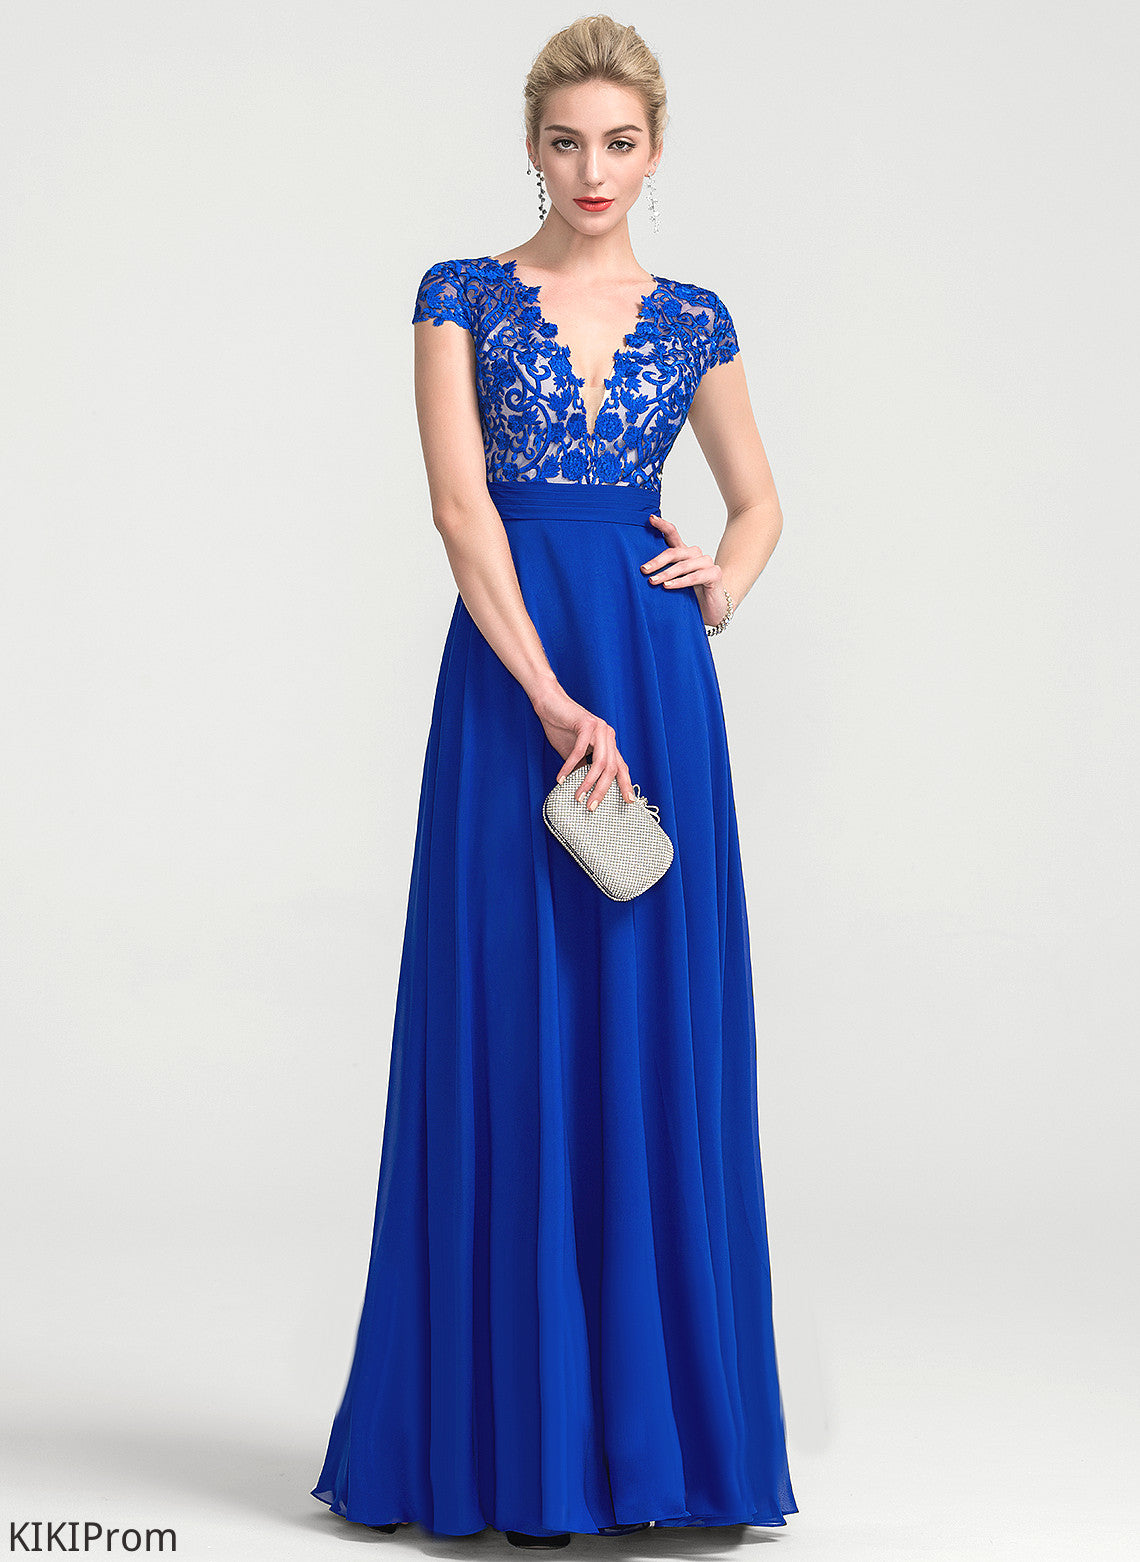 Ruffle Prom Dresses With A-Line Chiffon Lace V-neck Floor-Length Abby